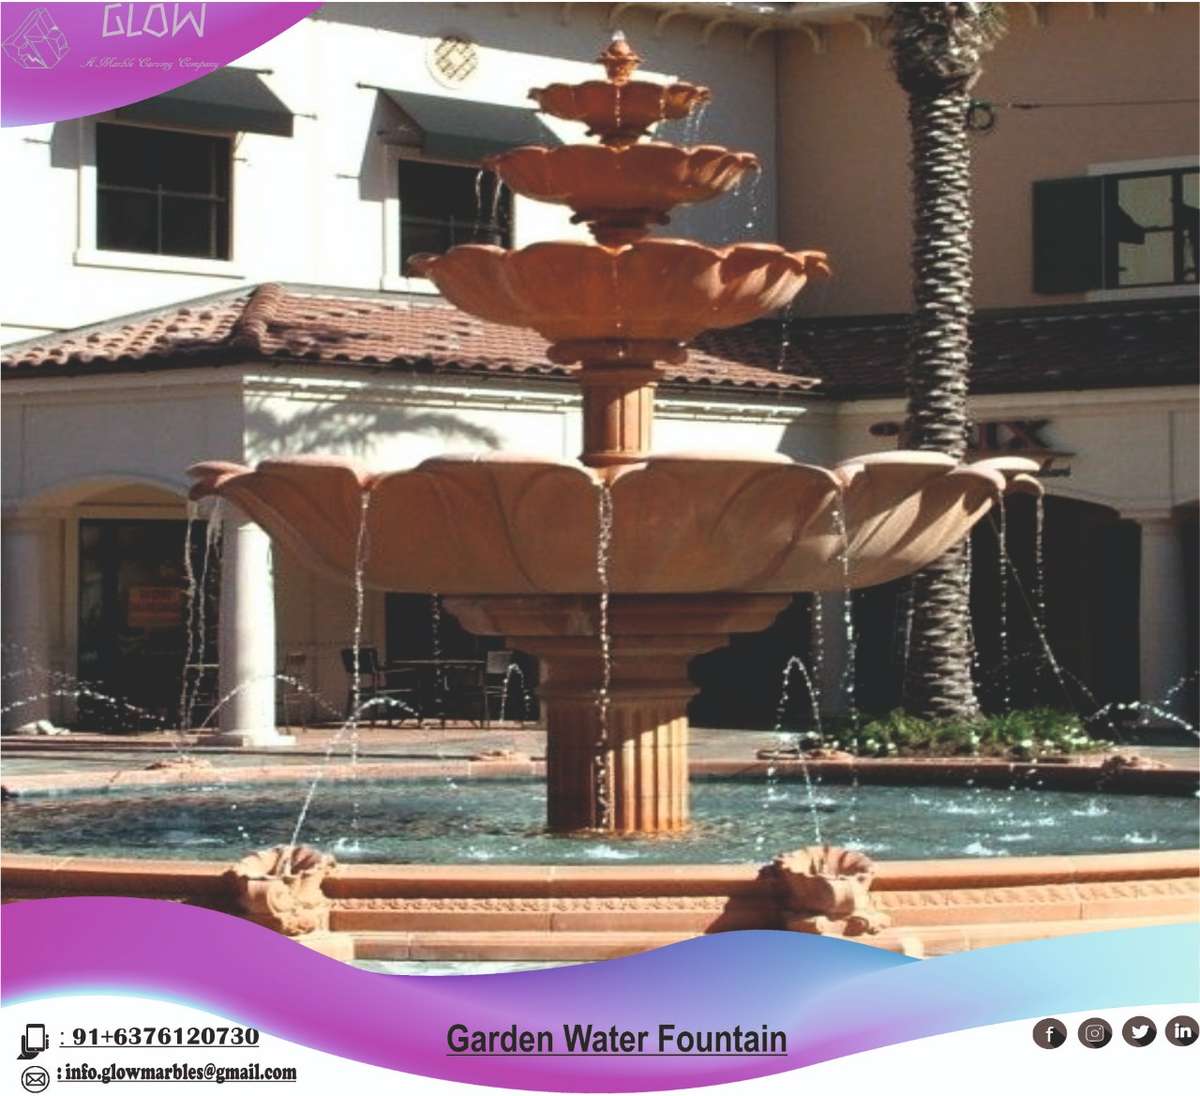 Glow Marble - A Marble Carving Company

We are manufacturer of all types Garden Marble Fountain

All India delivery and installation service are available

For more details : 6376120730
______________________________
.
.
.
.
.
.
#fountain #garden #gardenfountain #stonefountain #stoneartist #marblefountain #sandstonefountain #waterfountain #makrana #rajasthan #mumbai #marble #stone #artist #work #carving #fountainpennetwork #handmade #madeinindia #fountain #newpost #post #likeforlikes 